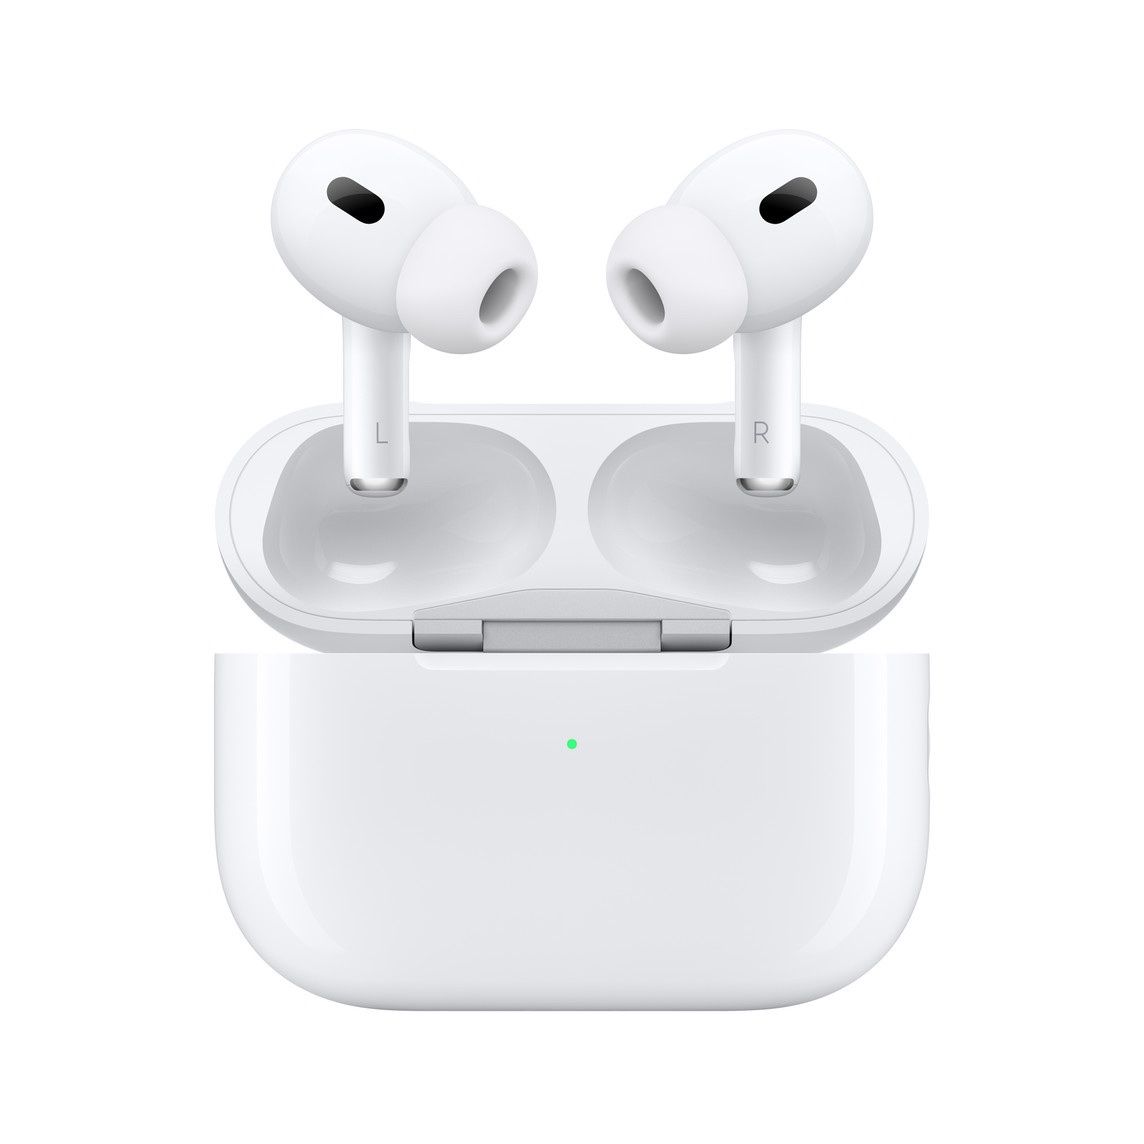  Apple AirPods Pros 2nd Generation Wireless Earbuds with Charging Case